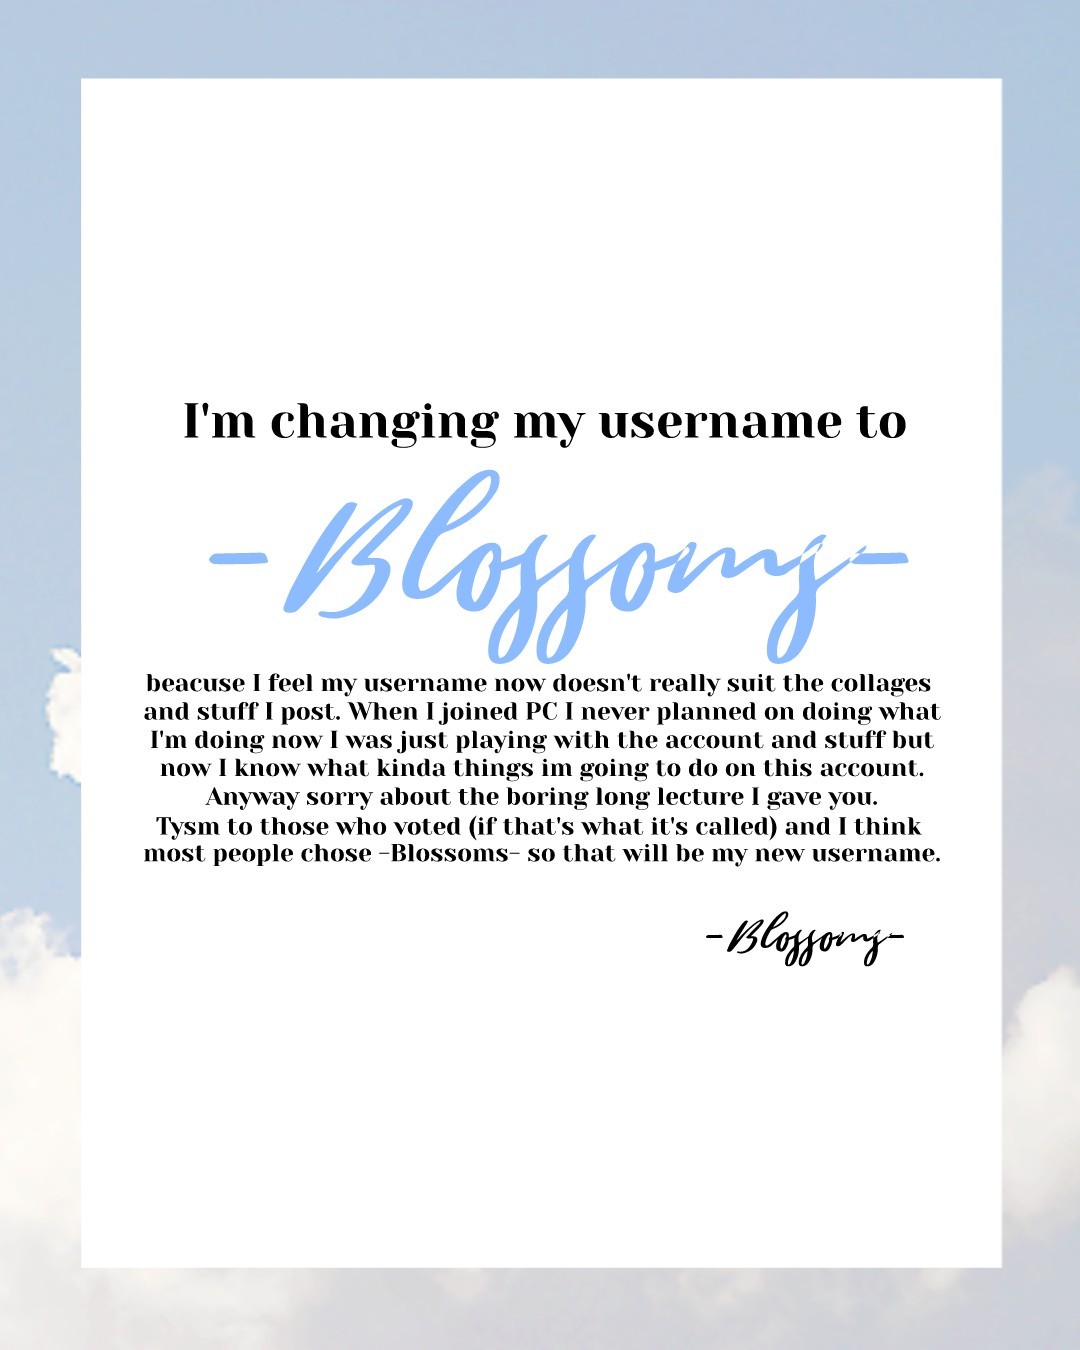 🌸Tap🌸
NEW USERNAME:
-Blossoms- 